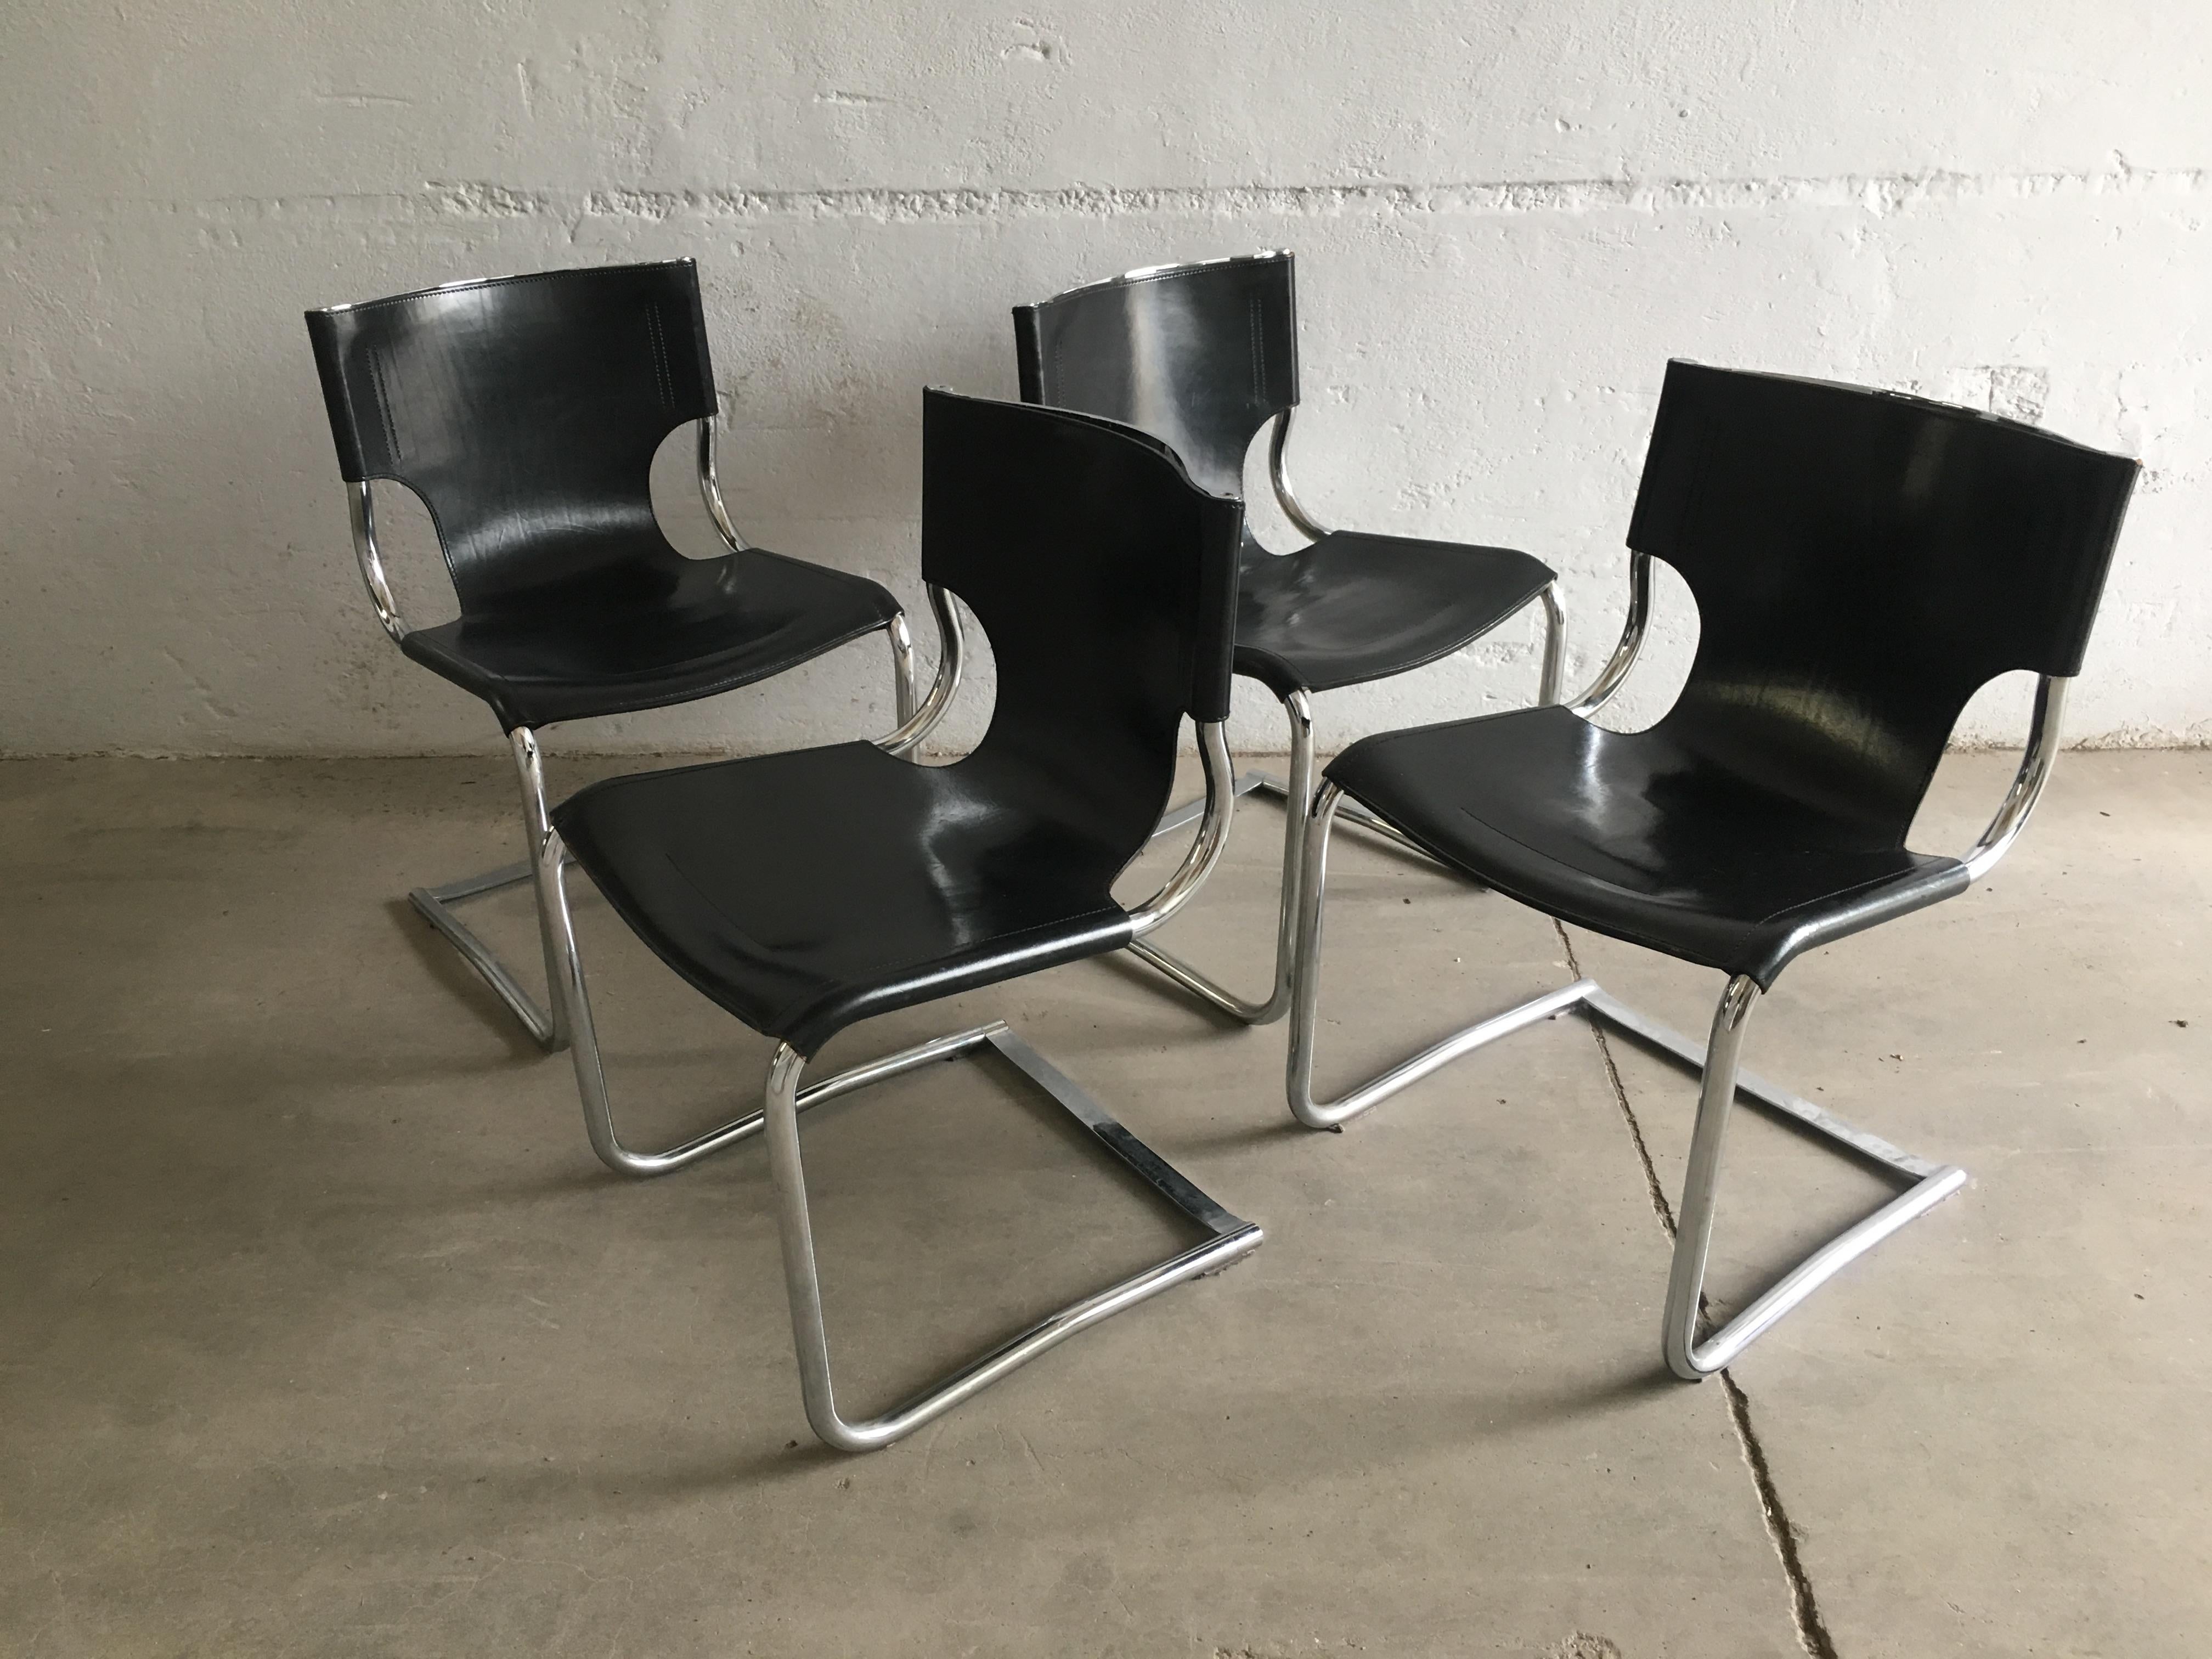 Mid-Century Modern set of four Italian chrome and black leather dining or office chairs, 1970s.